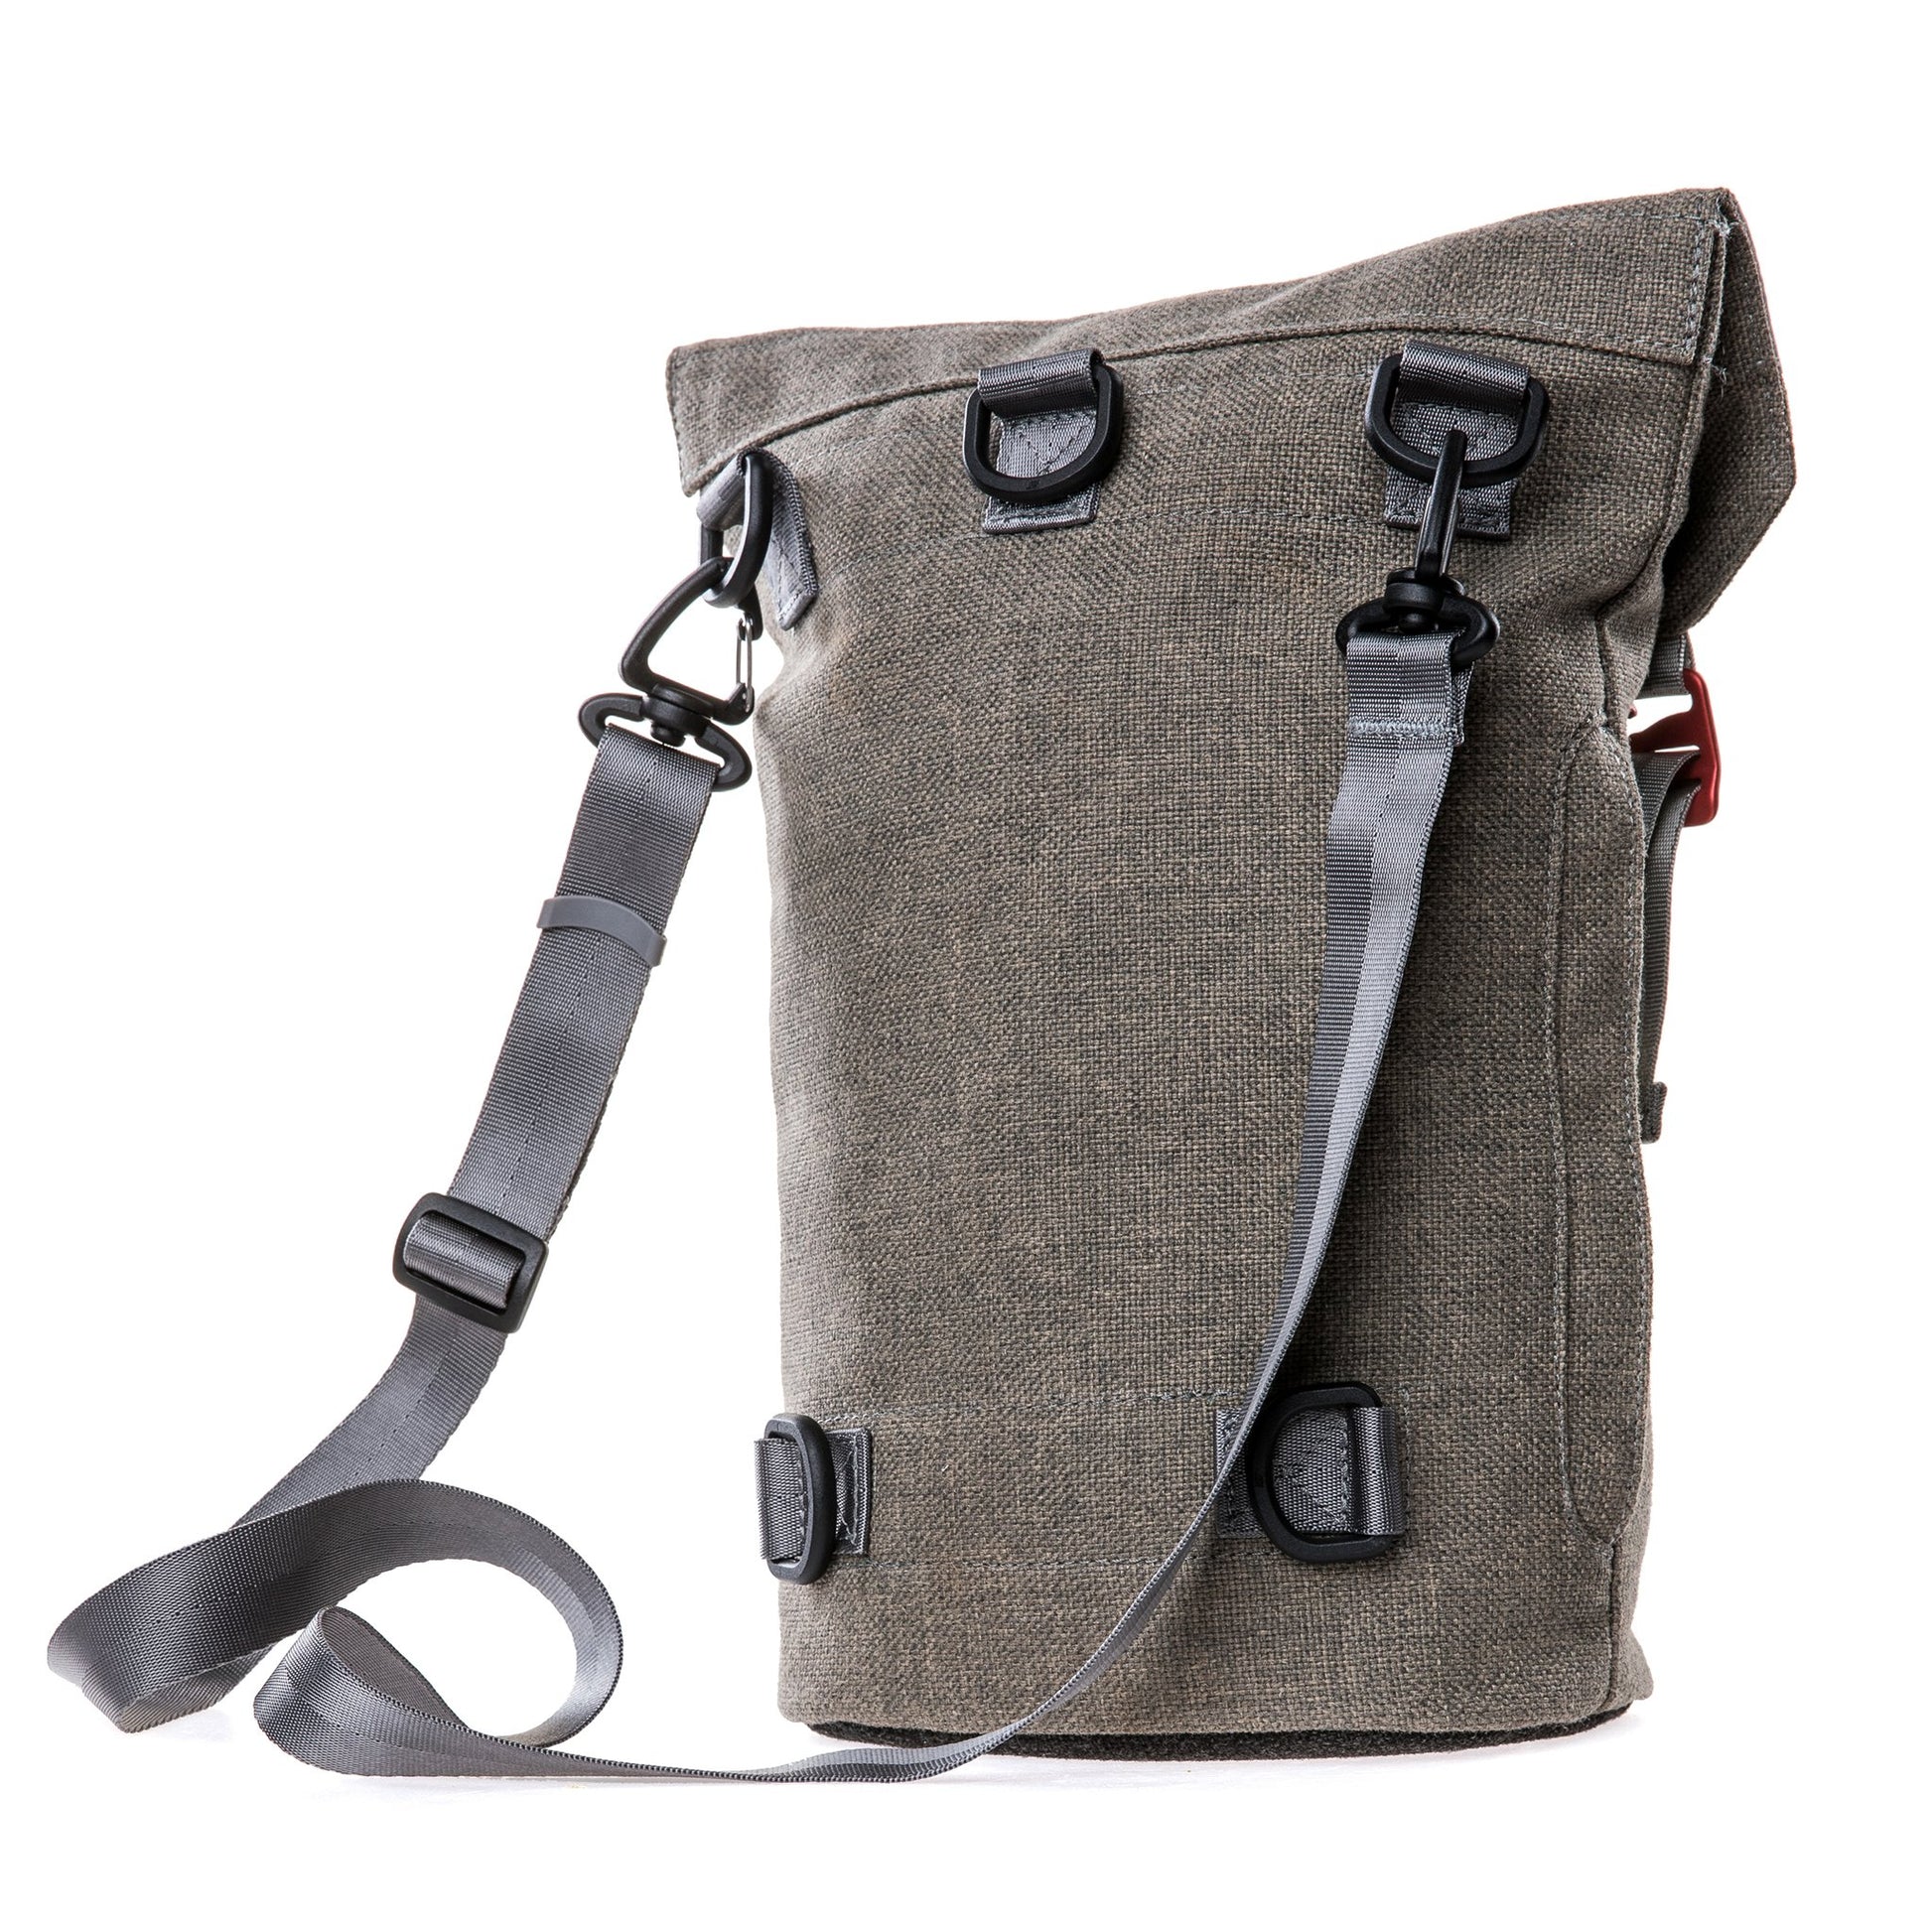 guys with cross body bags that have magnetic clip on straps; how